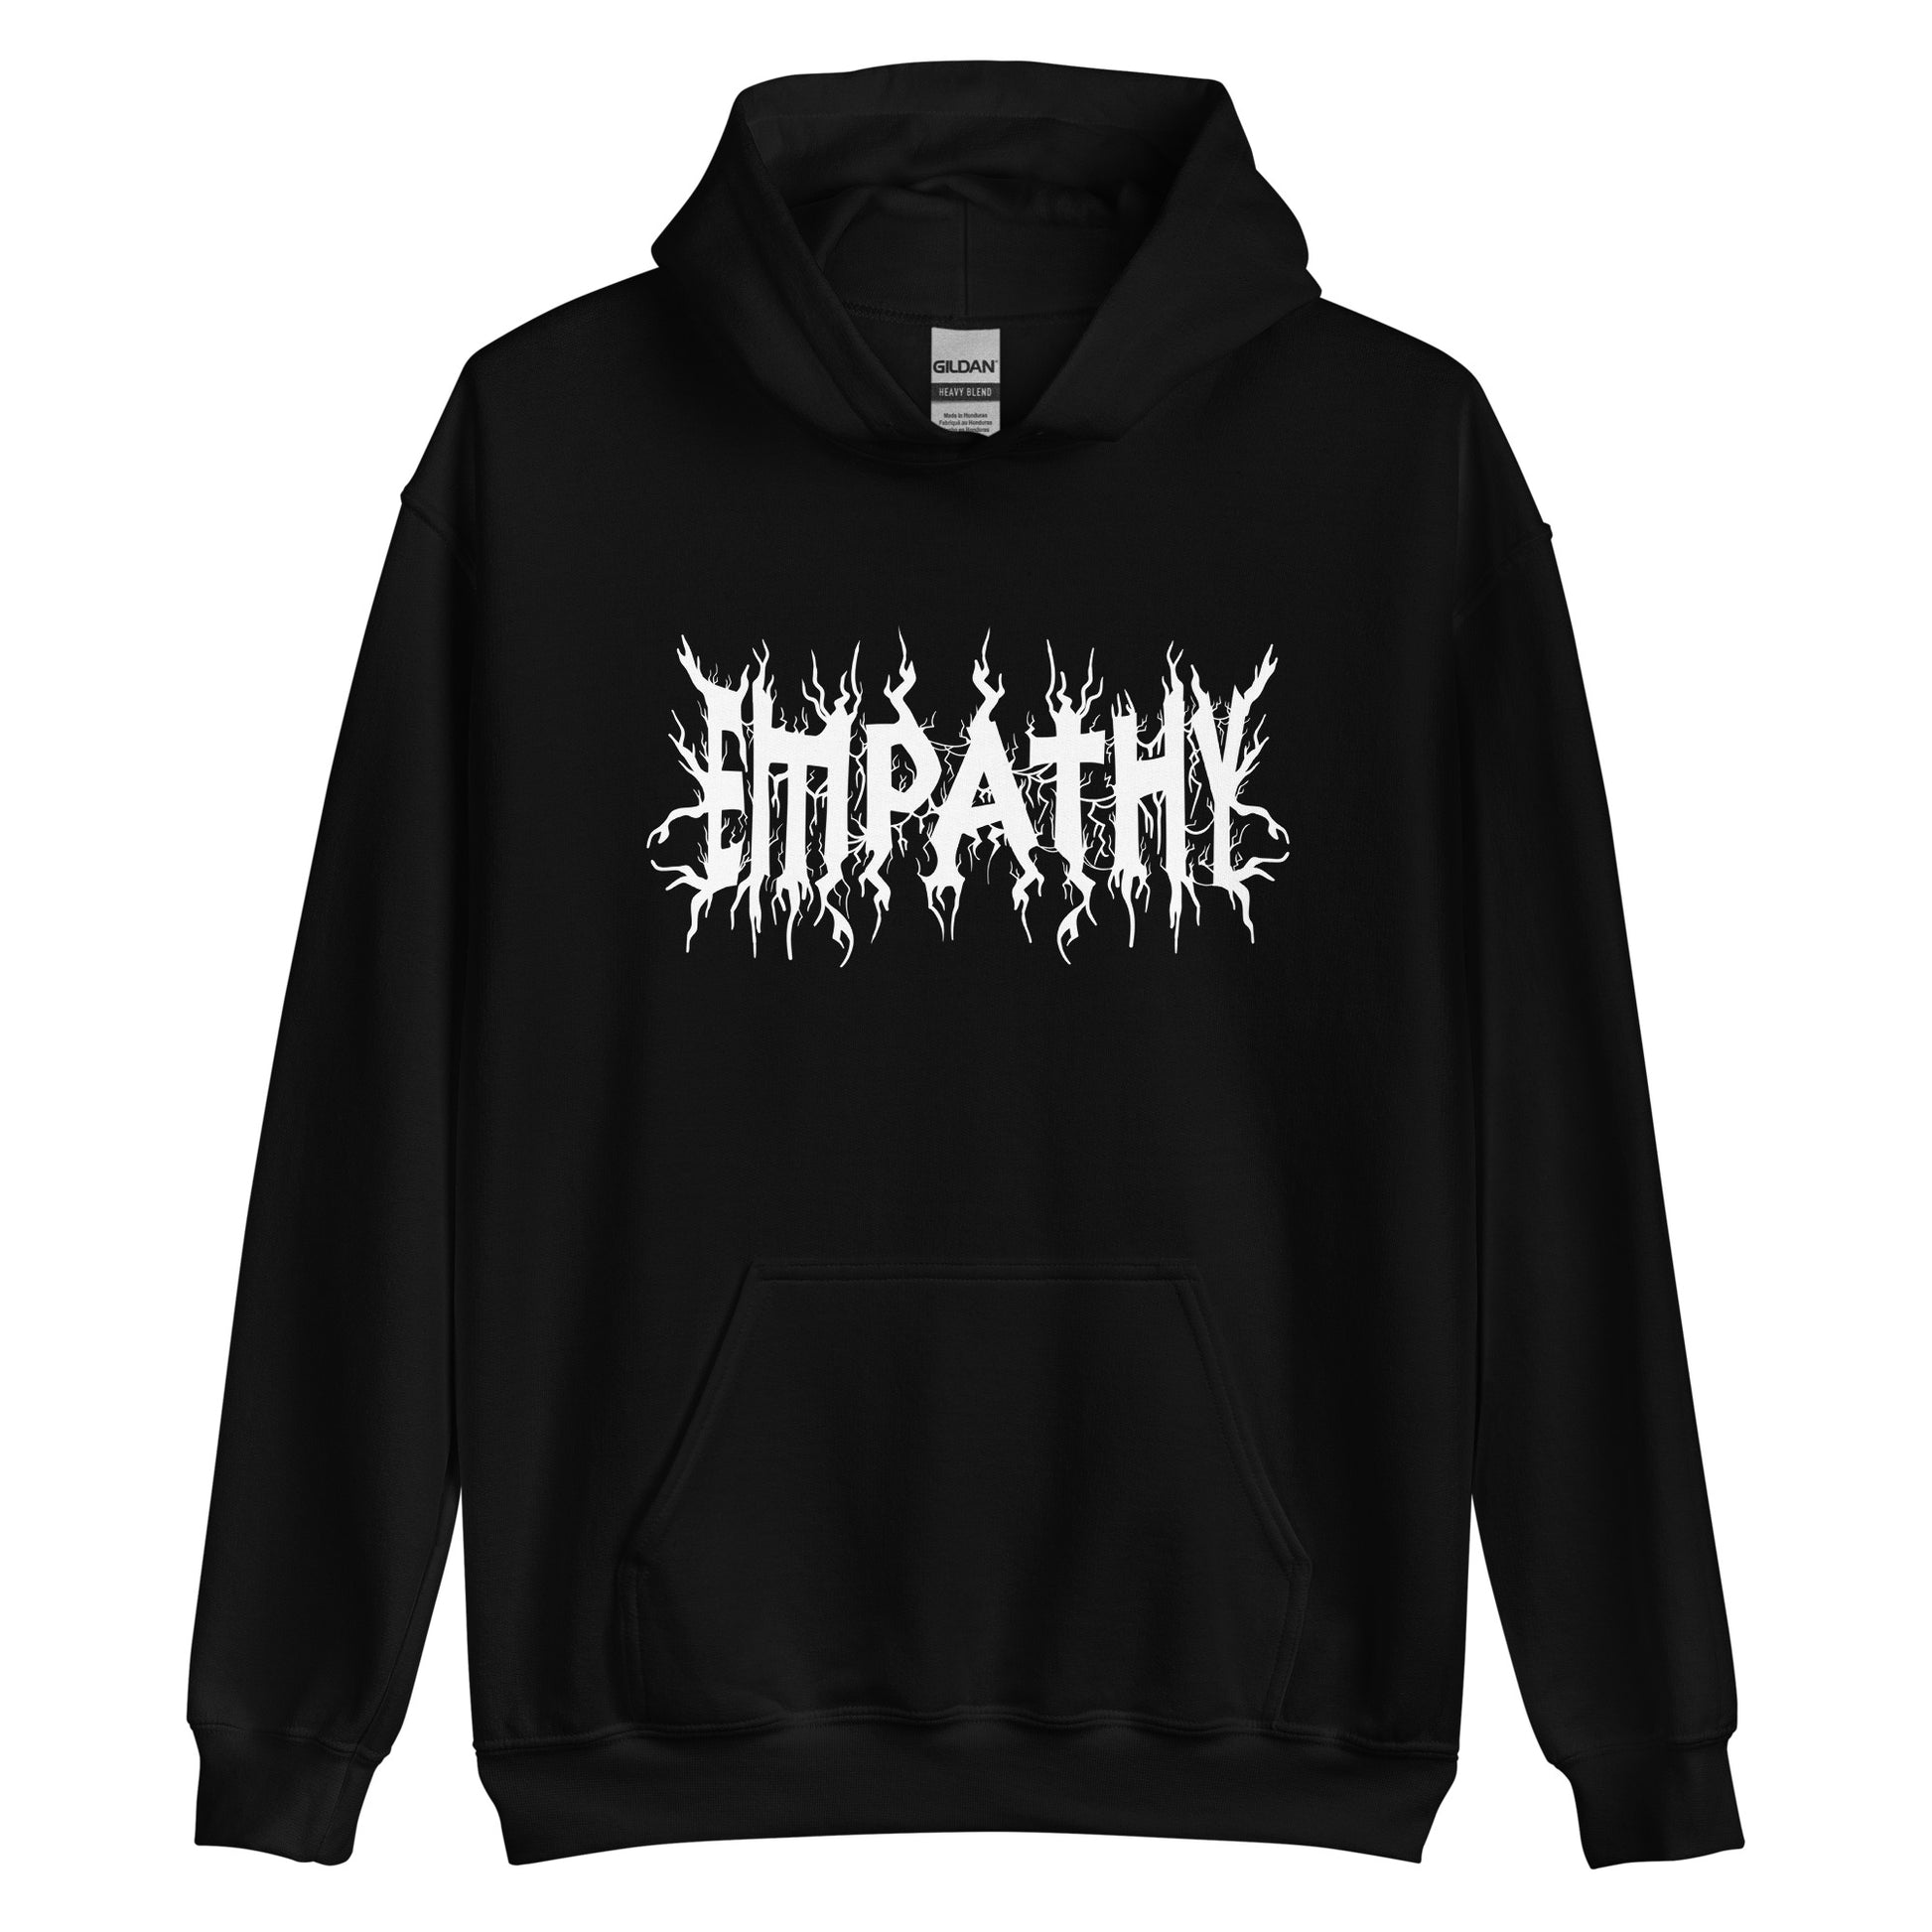 A black hooded sweatshirt featuring white text that reads "Empathy" in a jagged font  in the style of heavy metal band shirts